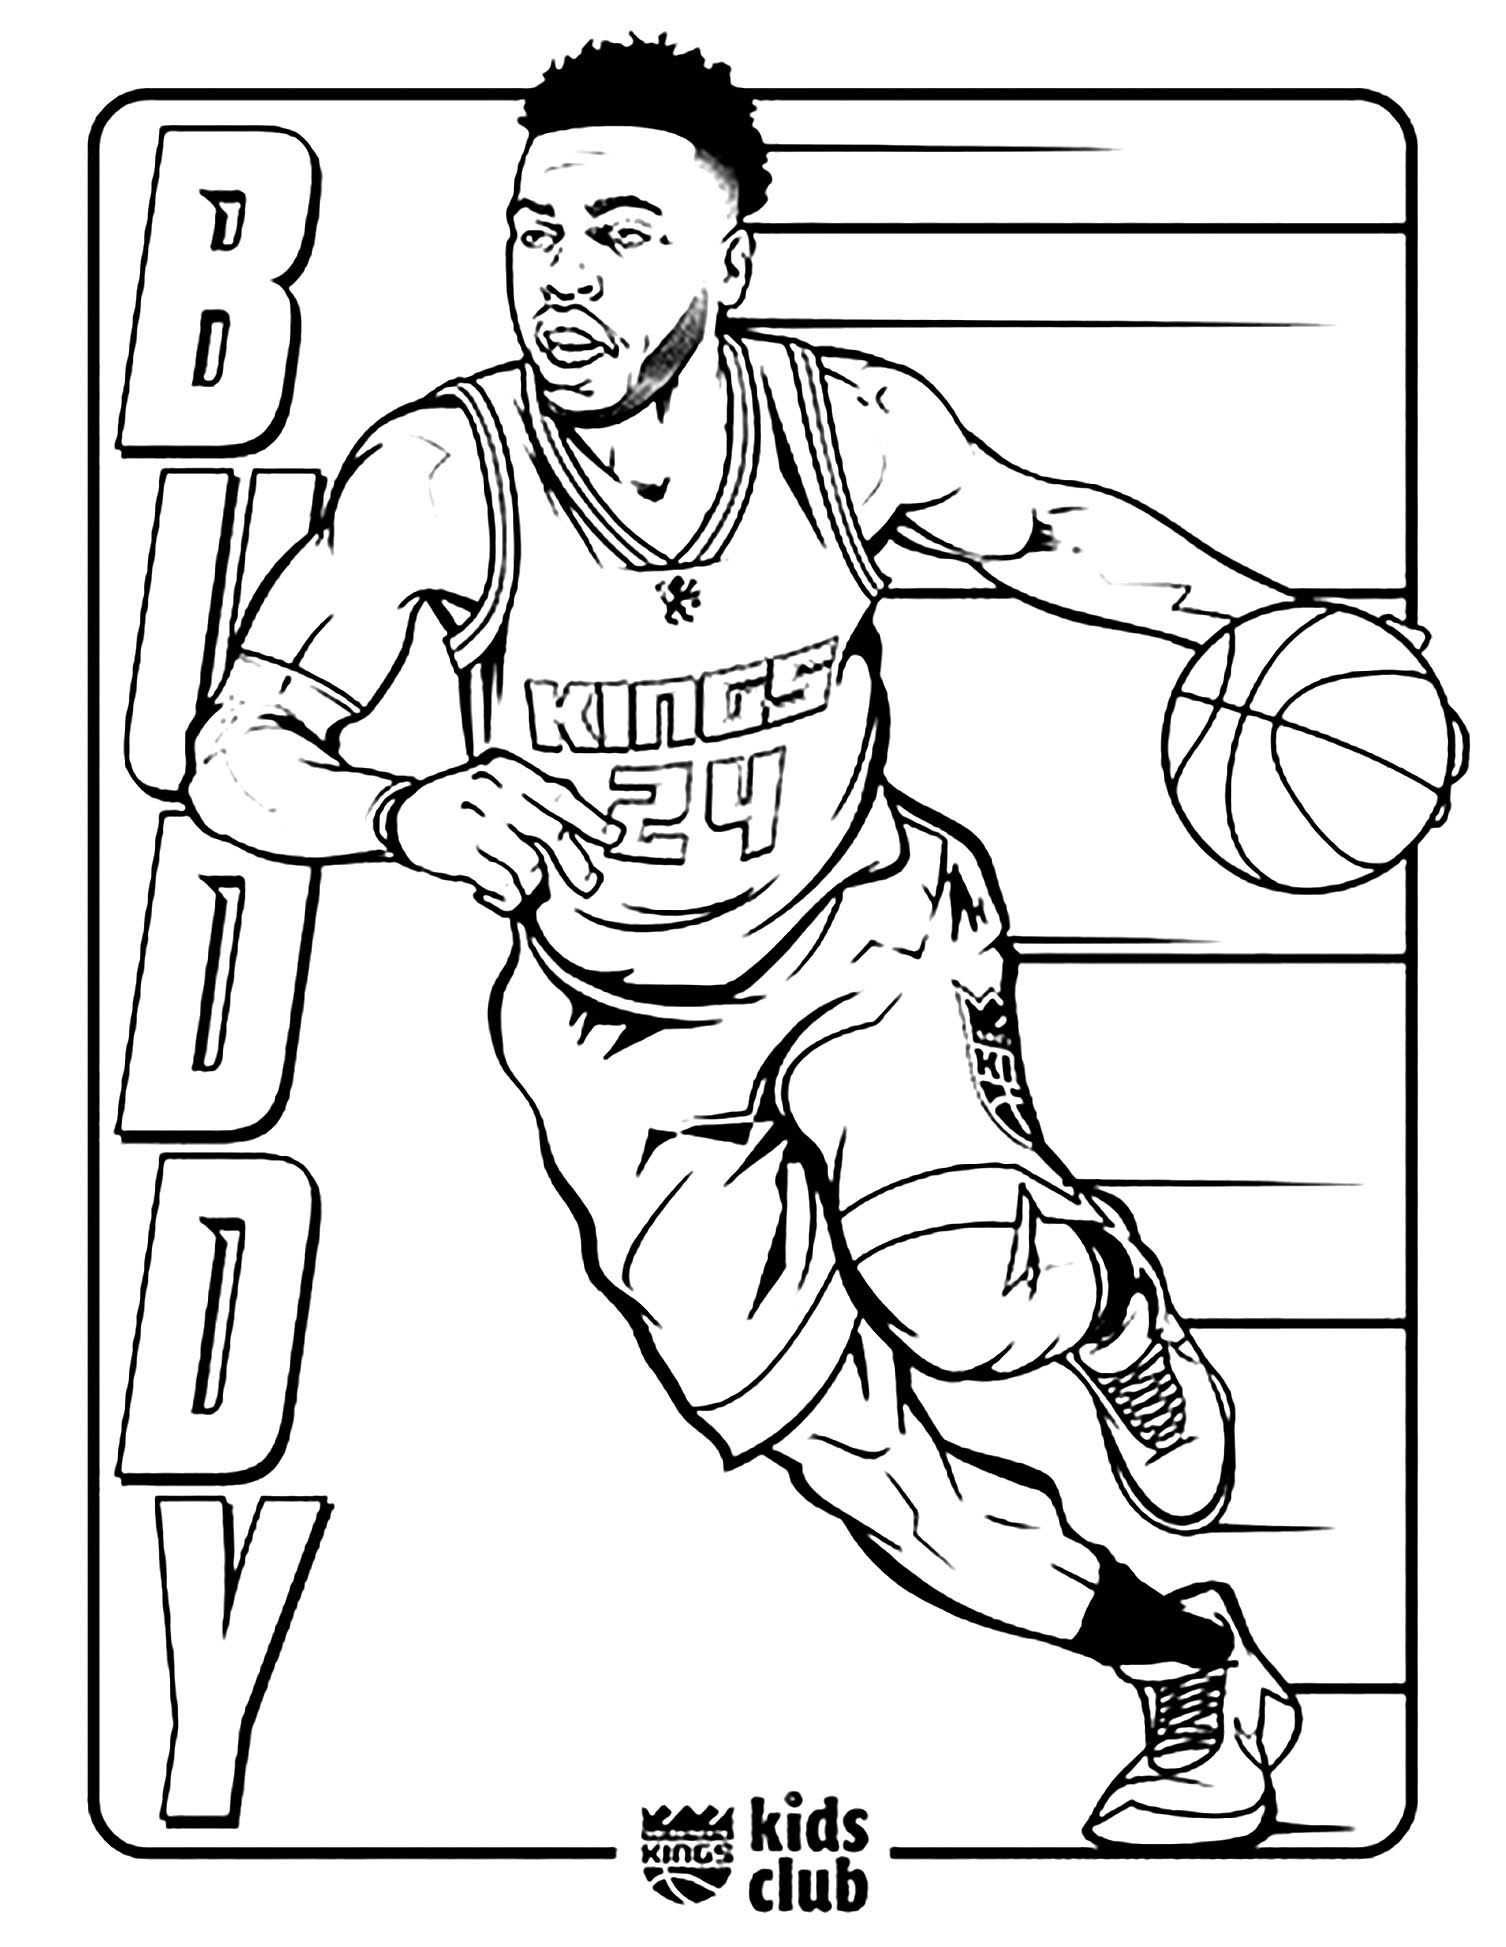 basketball-image-to-download-and-color-basketball-kids-coloring-pages